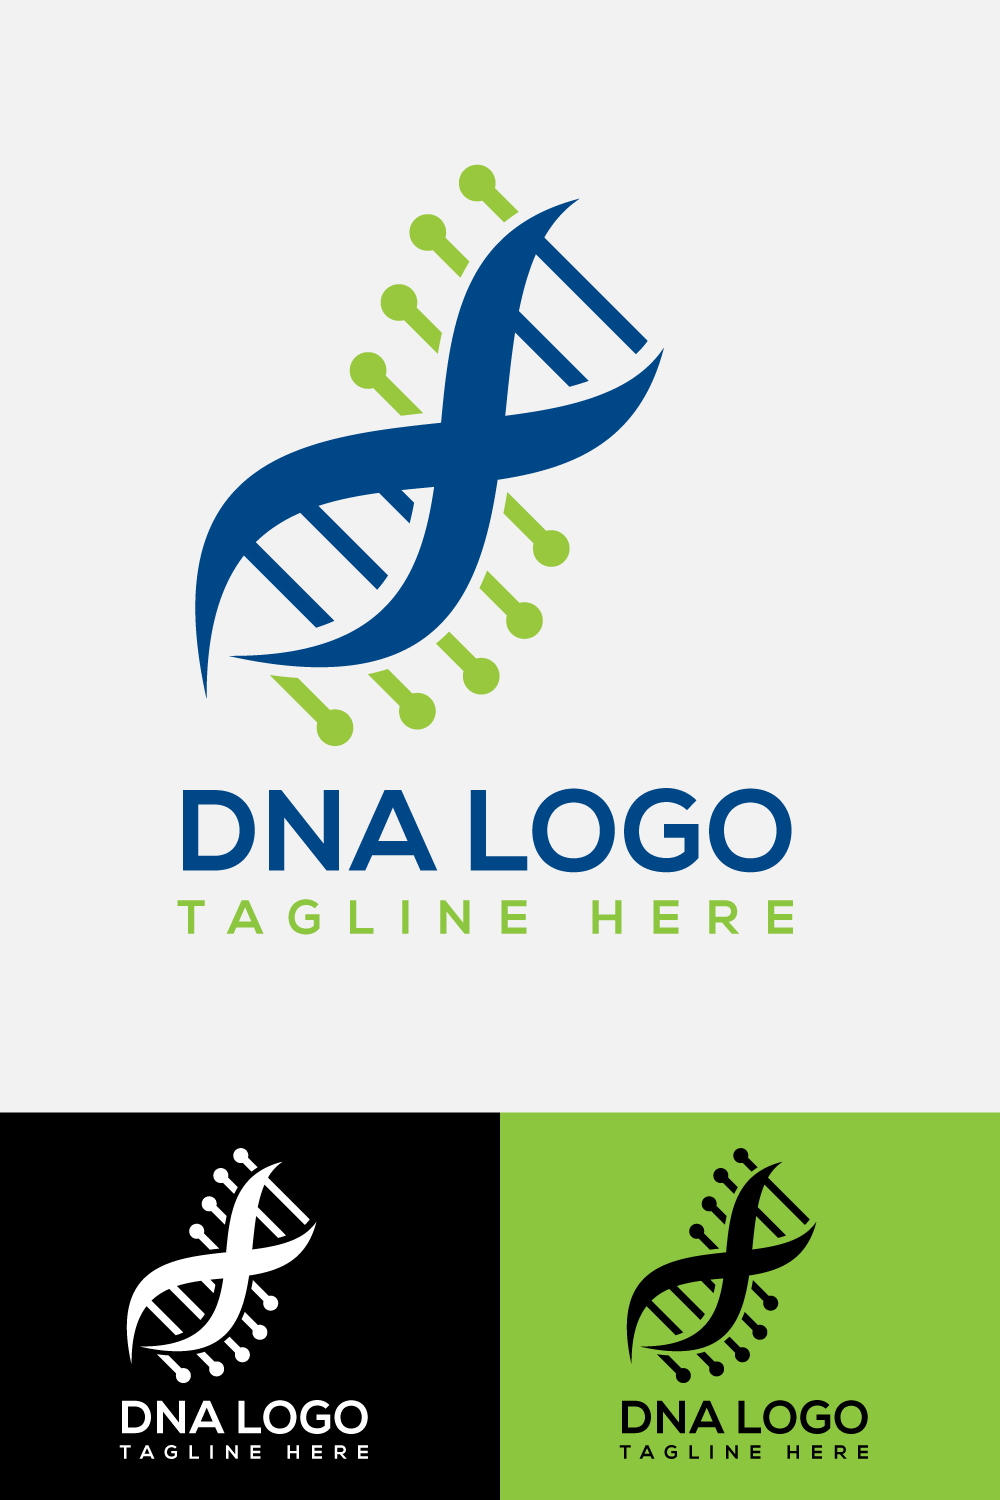 A selection of images of unique logos in the form of a form of DNA.